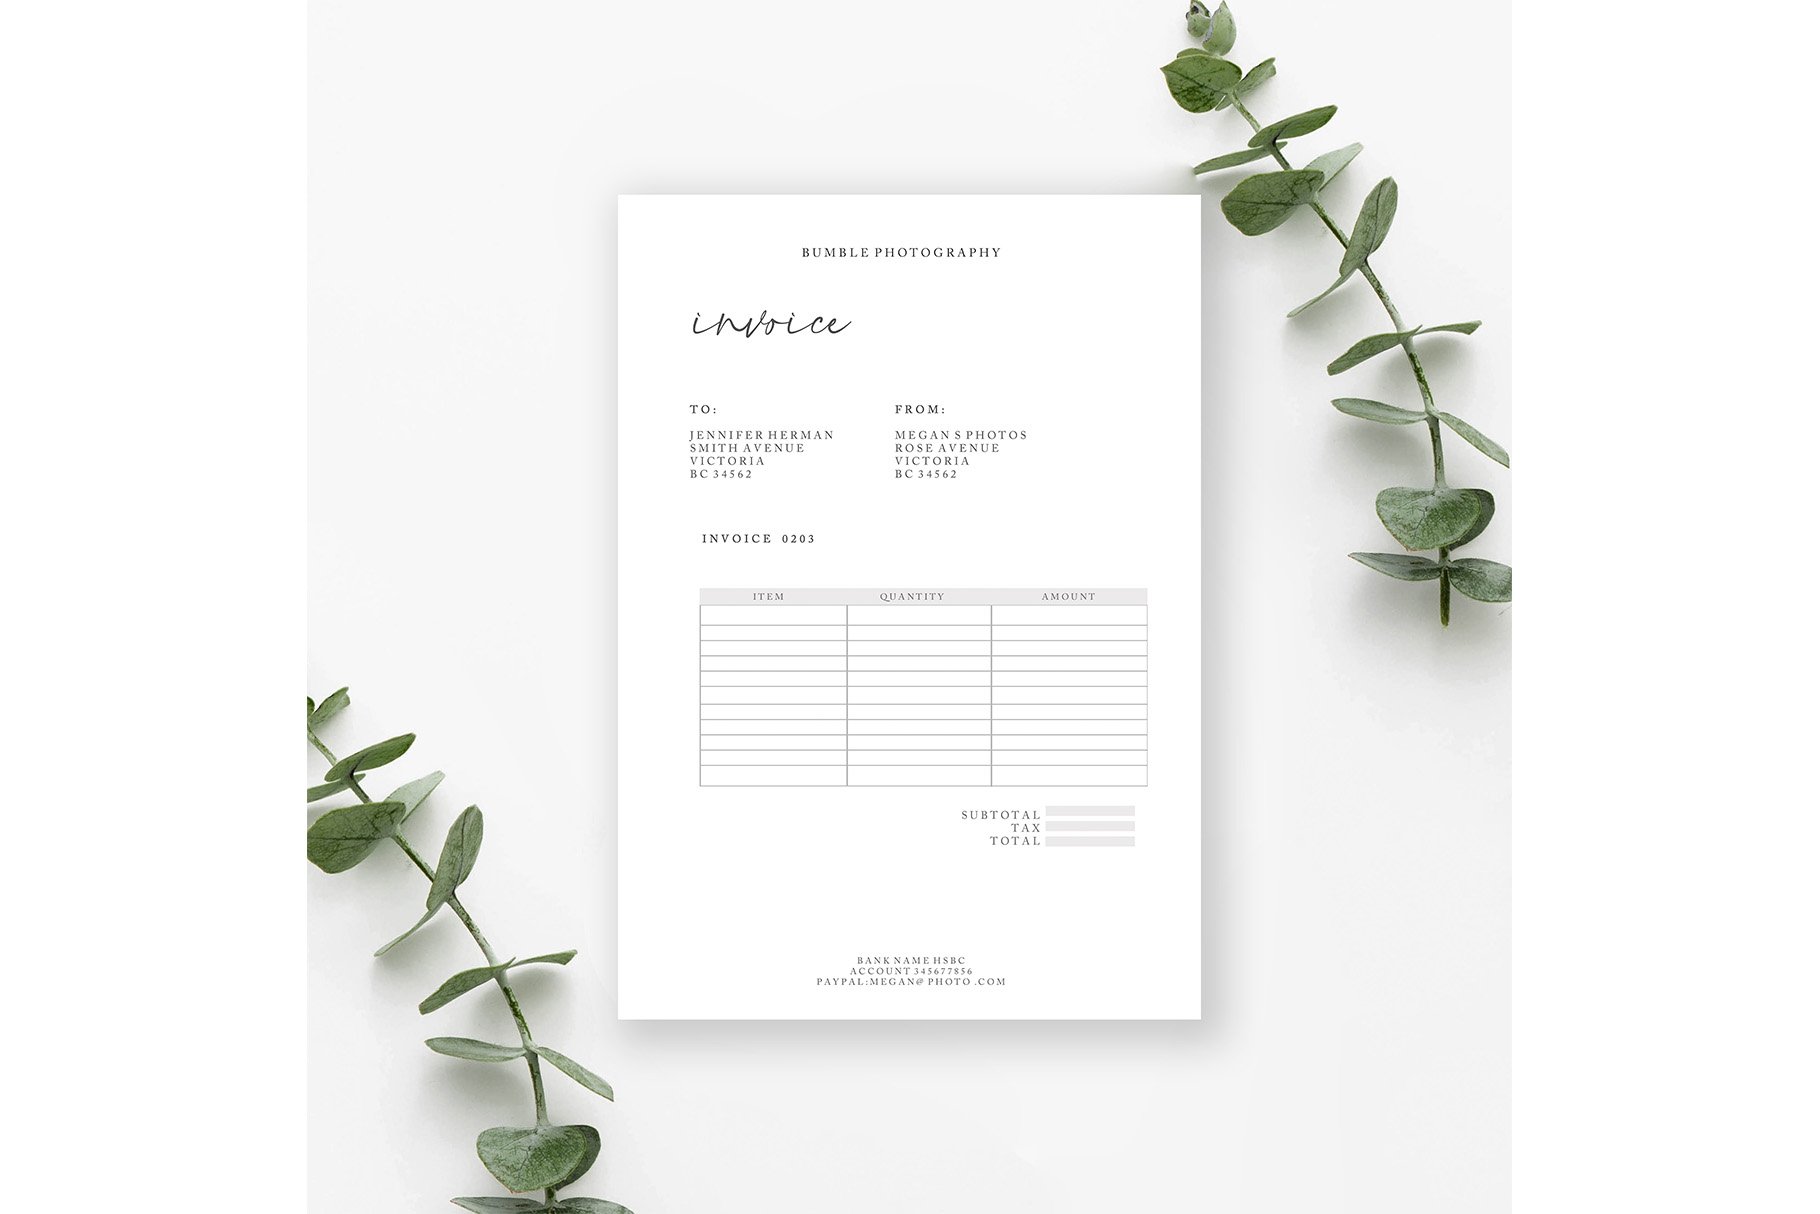 Photography Invoice, PSD and MS WORD cover image.